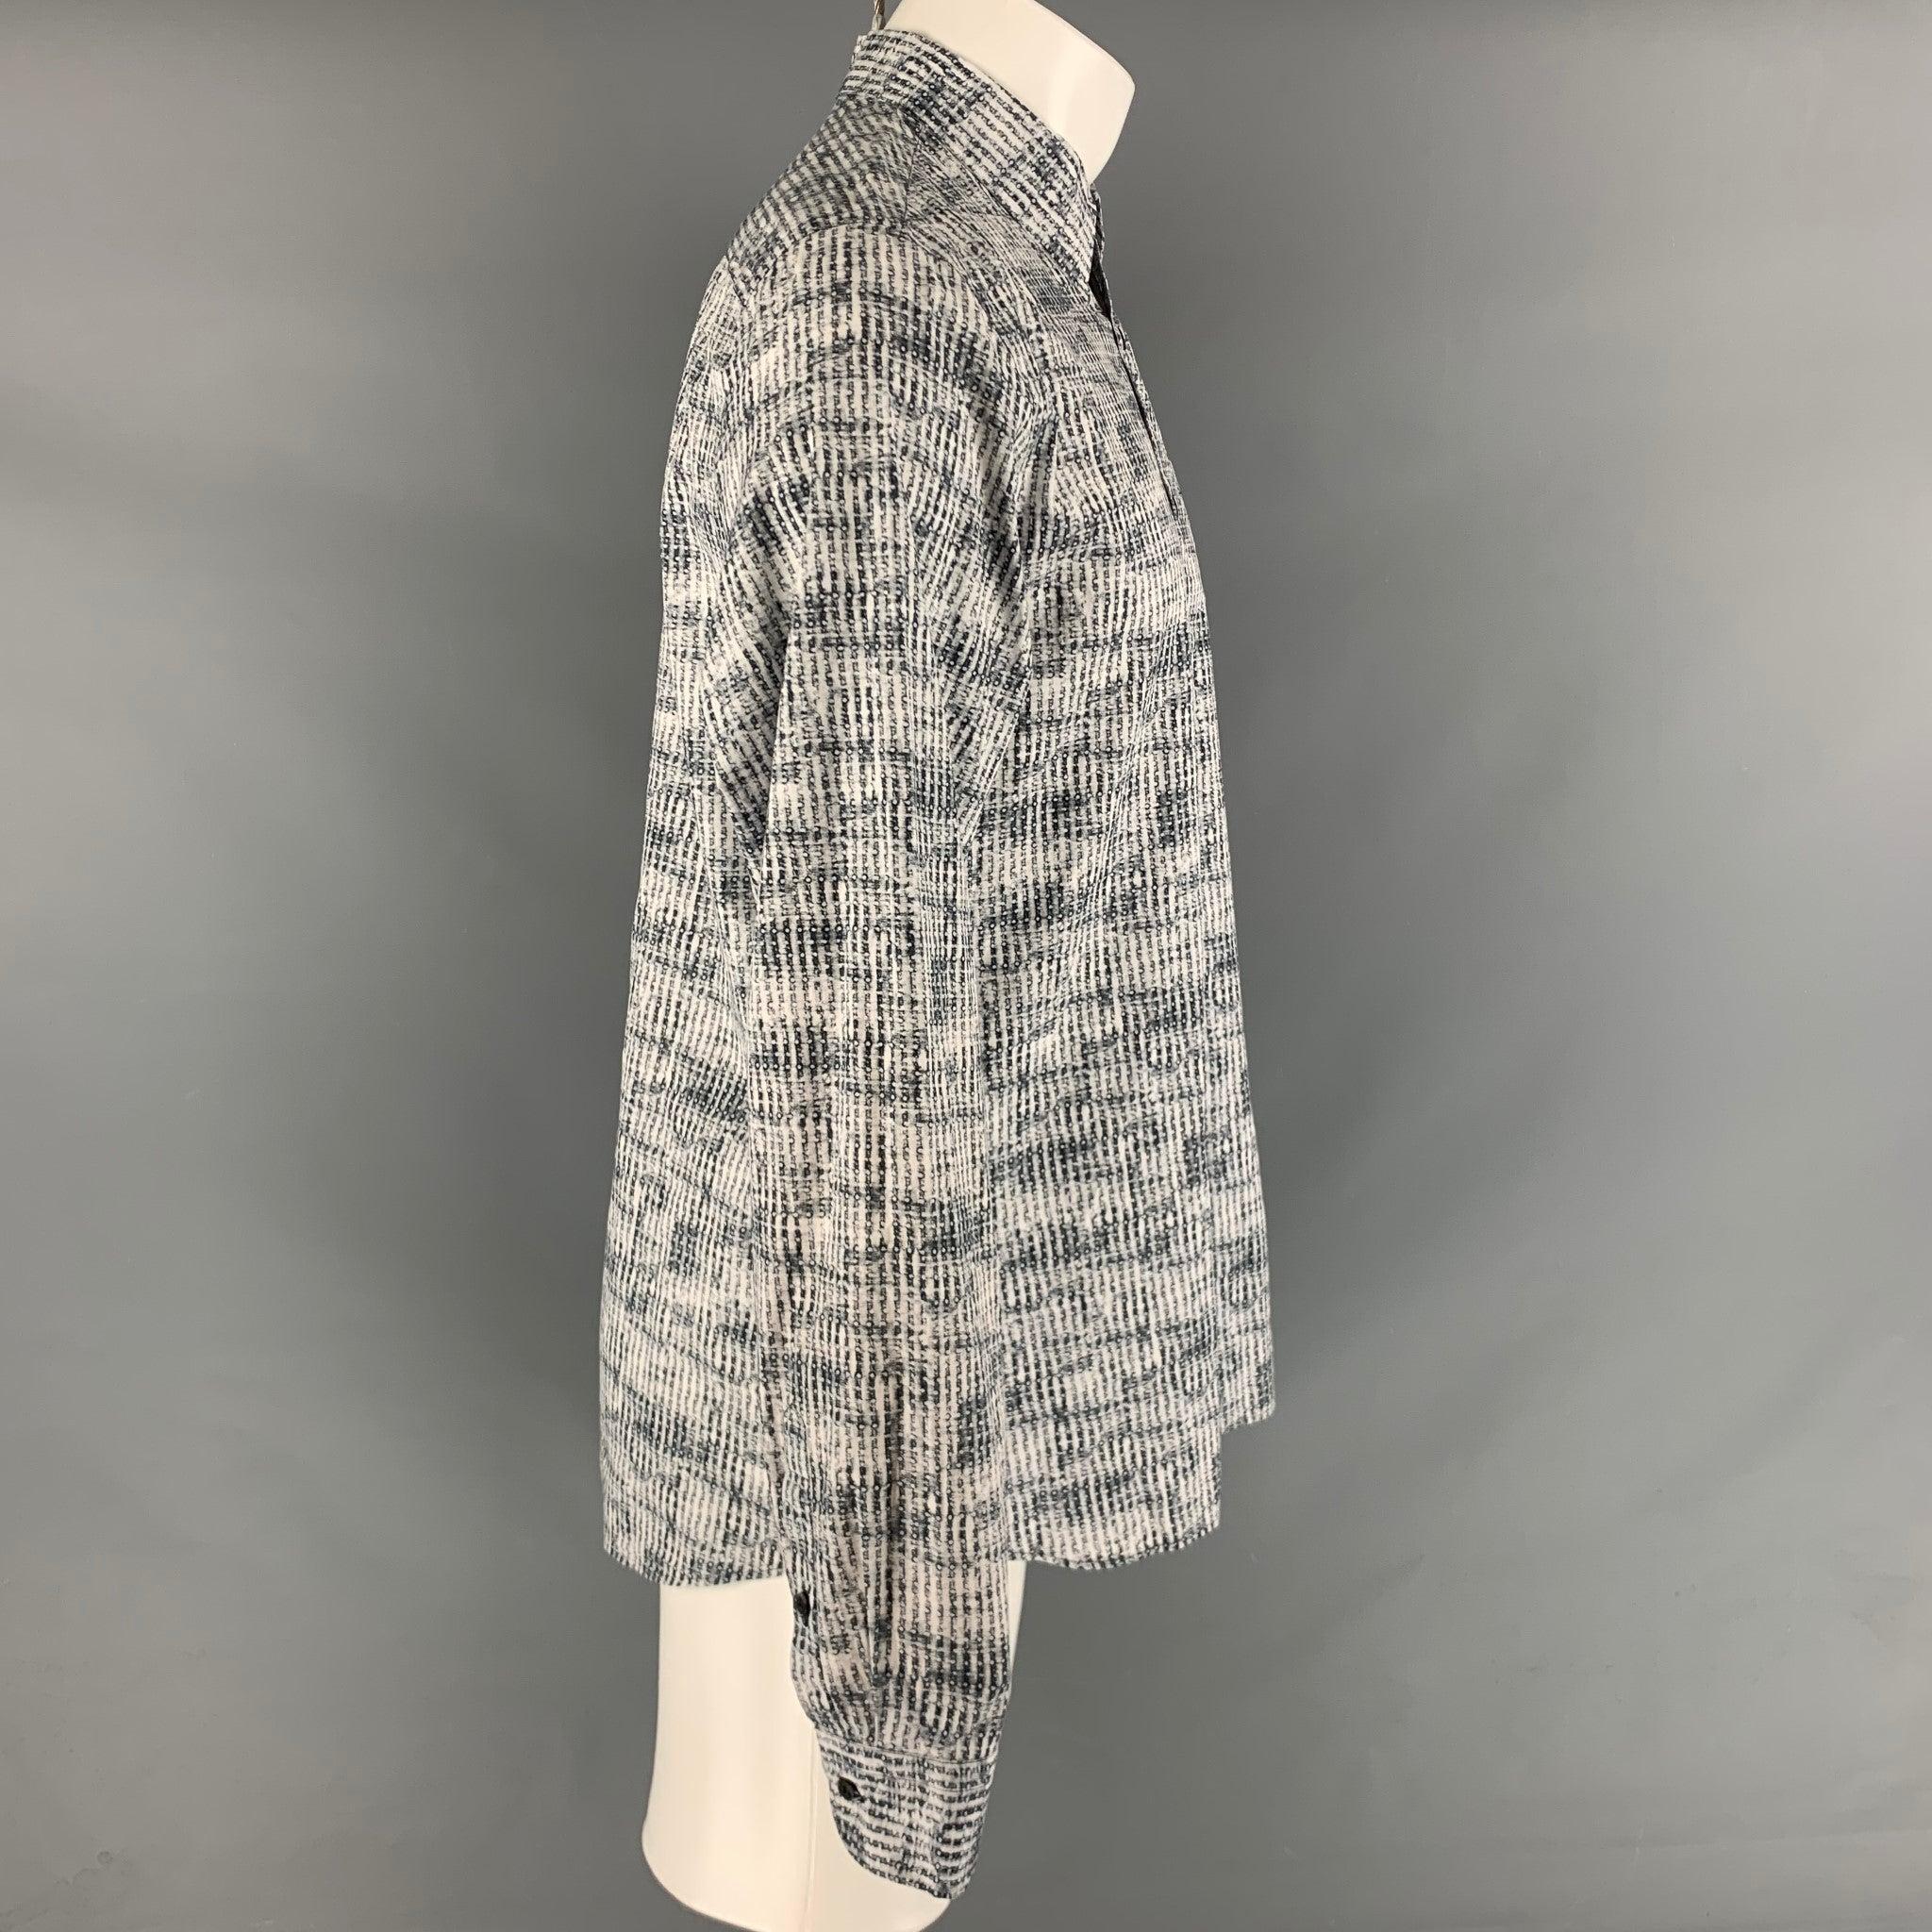 PRADA long sleeve shirt comes in a white and grey cotton abstract print featuring a button up style and a spread color. Made in Italy.Excellent Pre-Owned Condition. 

Marked:   42 & 16 1/2
 

Measurements: 
 
Shoulder: 17 inches Chest: 43 inches